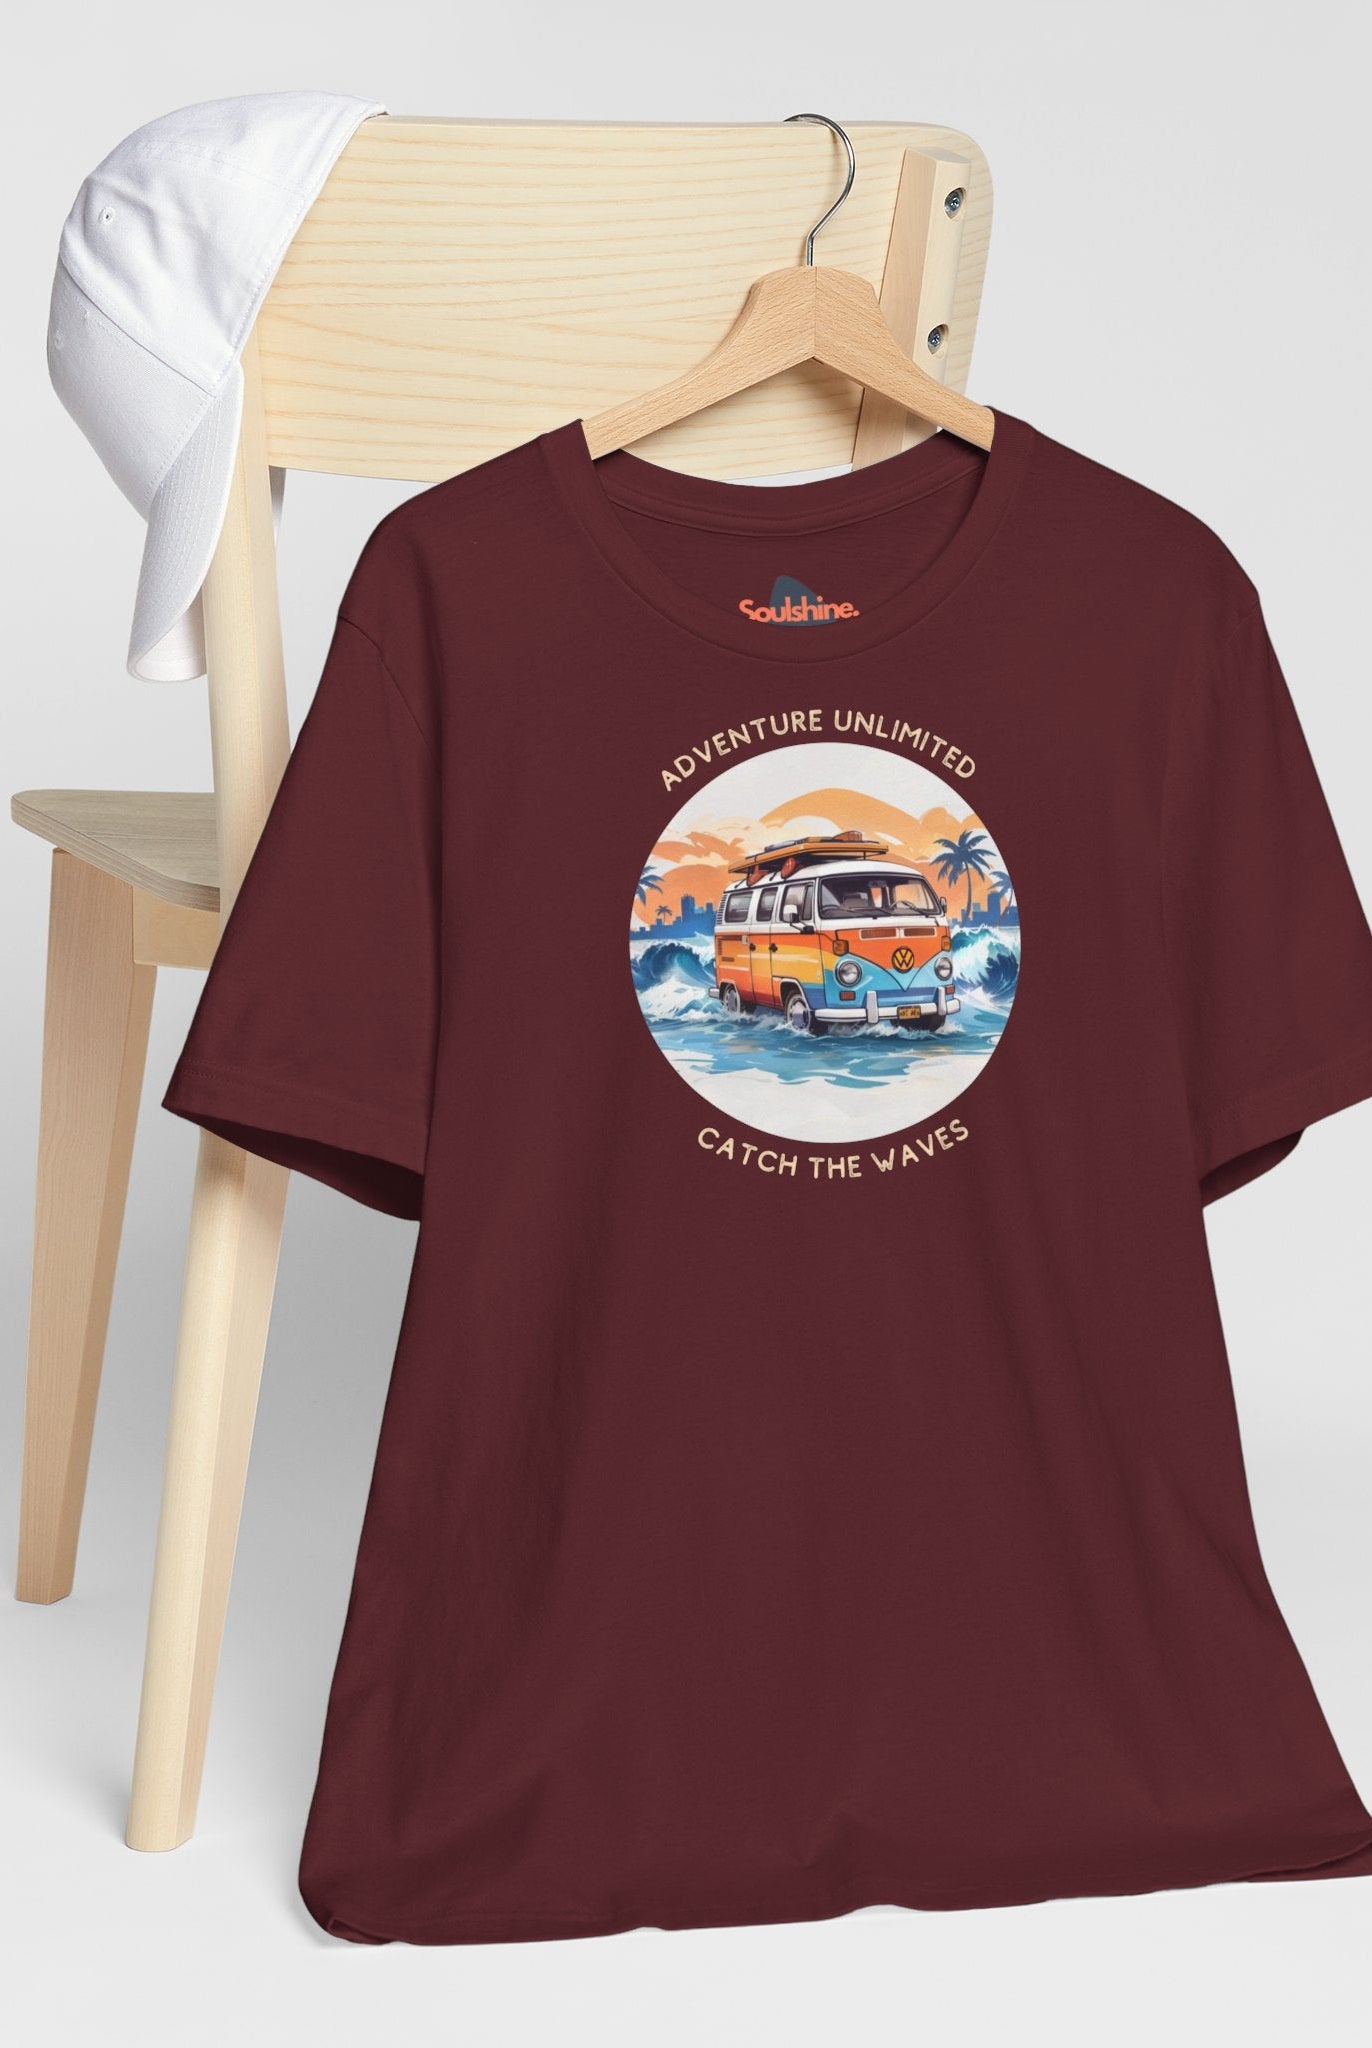 Adventure Unlimited Surfing T-Shirt printed on Bella & Canvas item